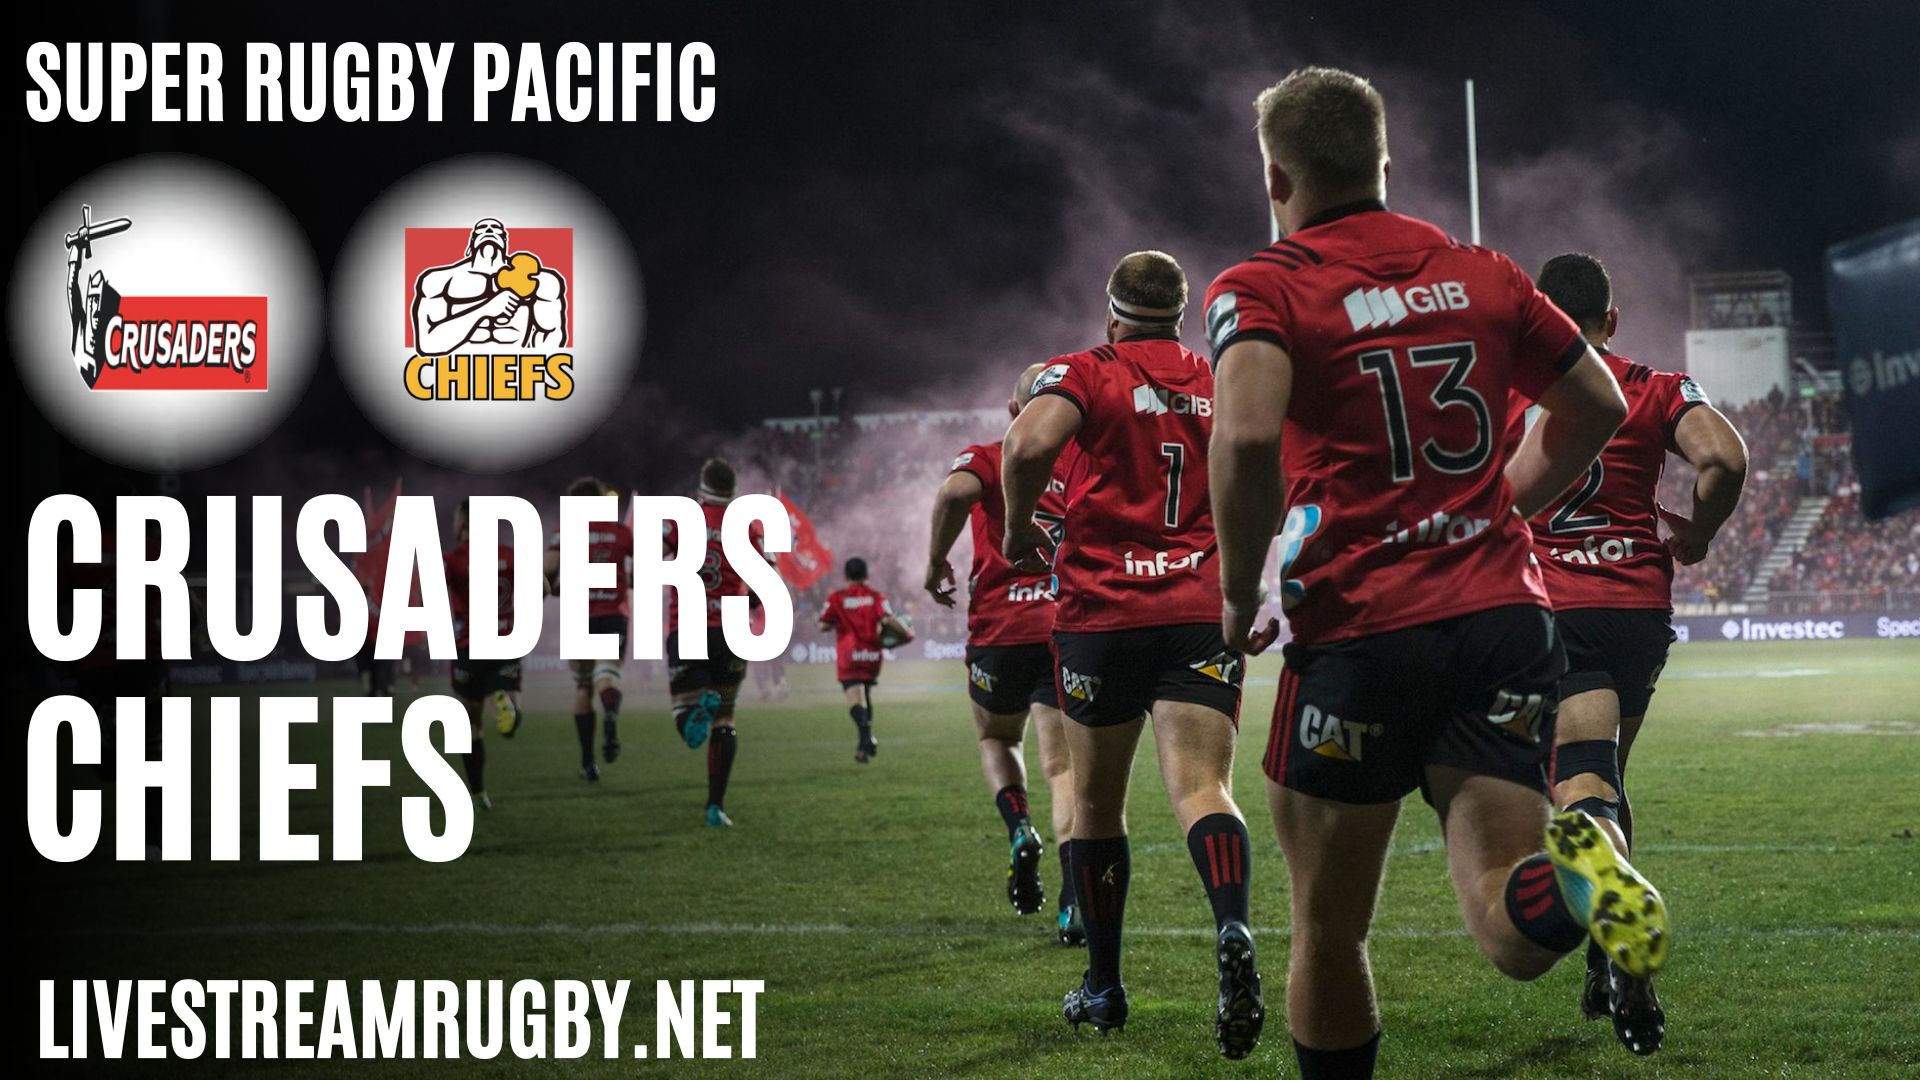 crusaders-vs-chiefs-live-stream-super-rugby-pacific